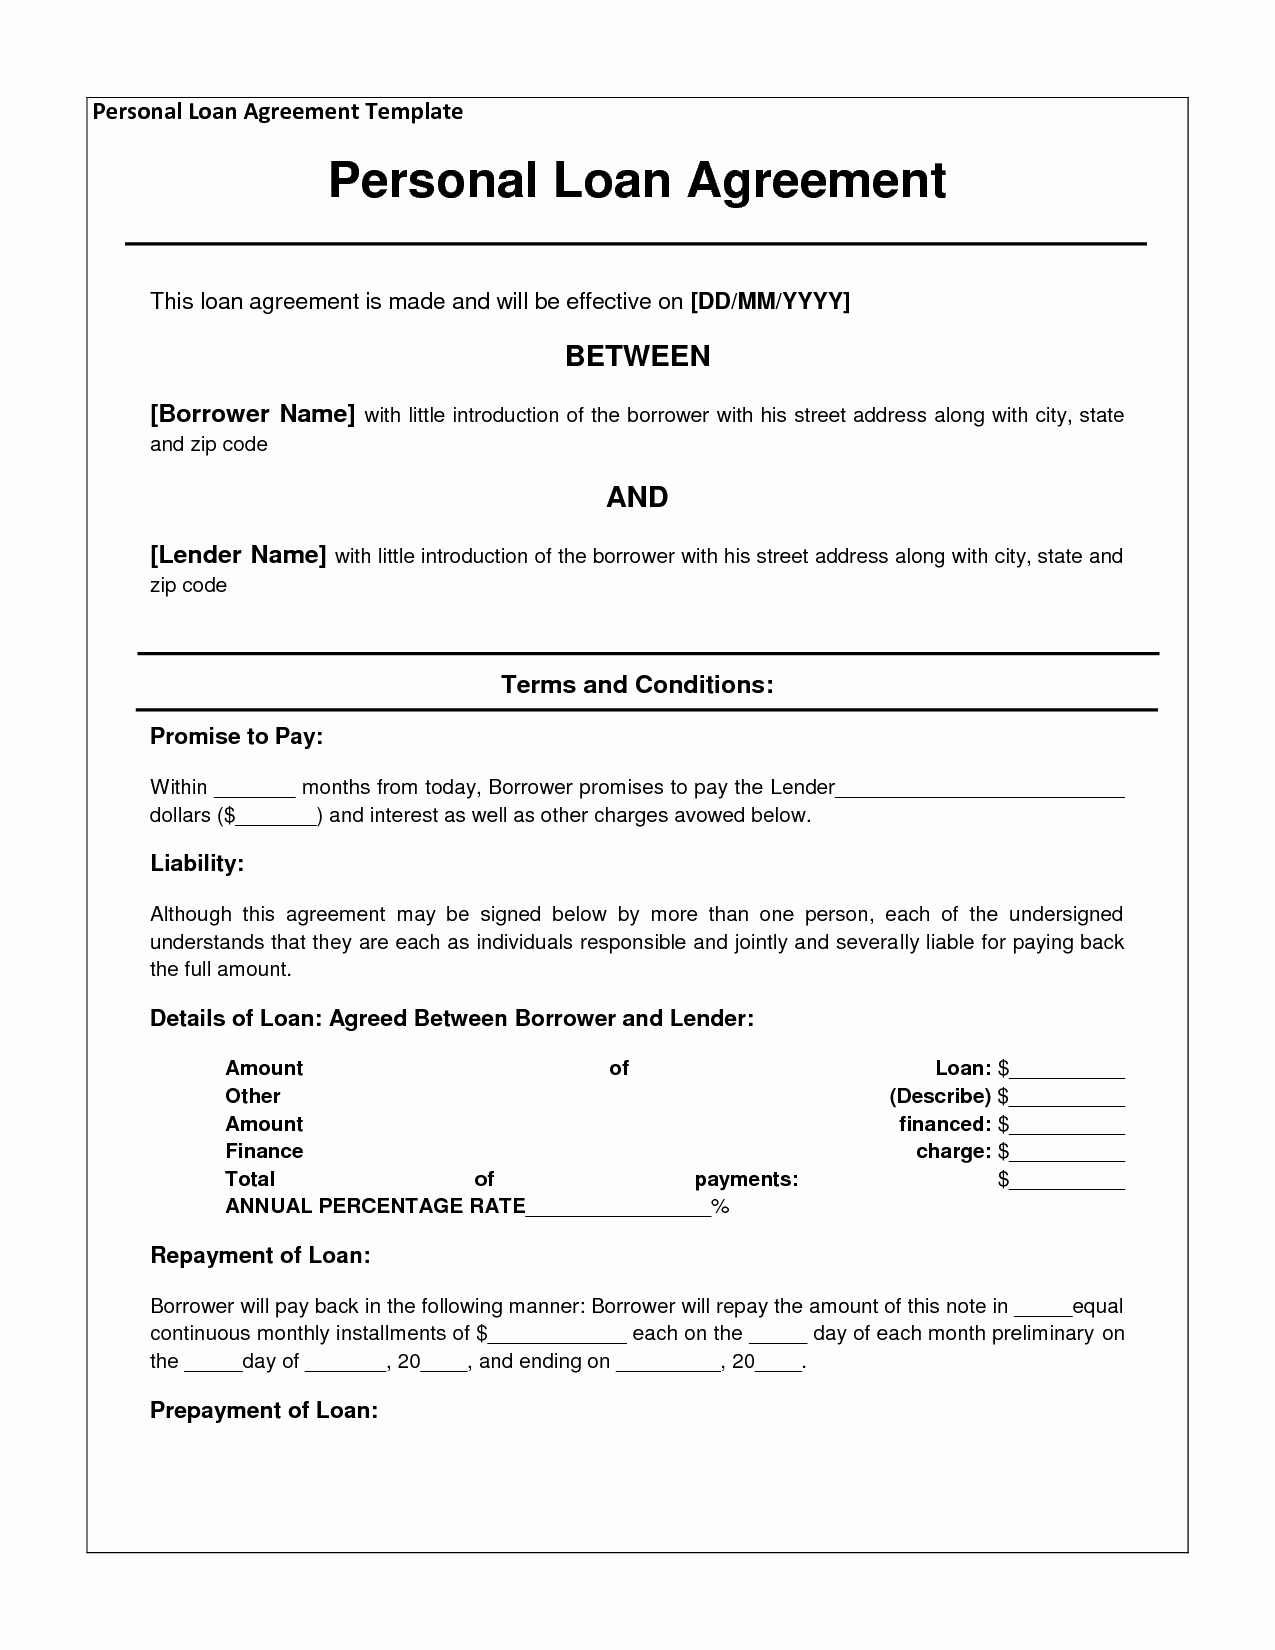 Personal Loan Application form Template Elegant Free Personal Loan Agreement form Template $1000